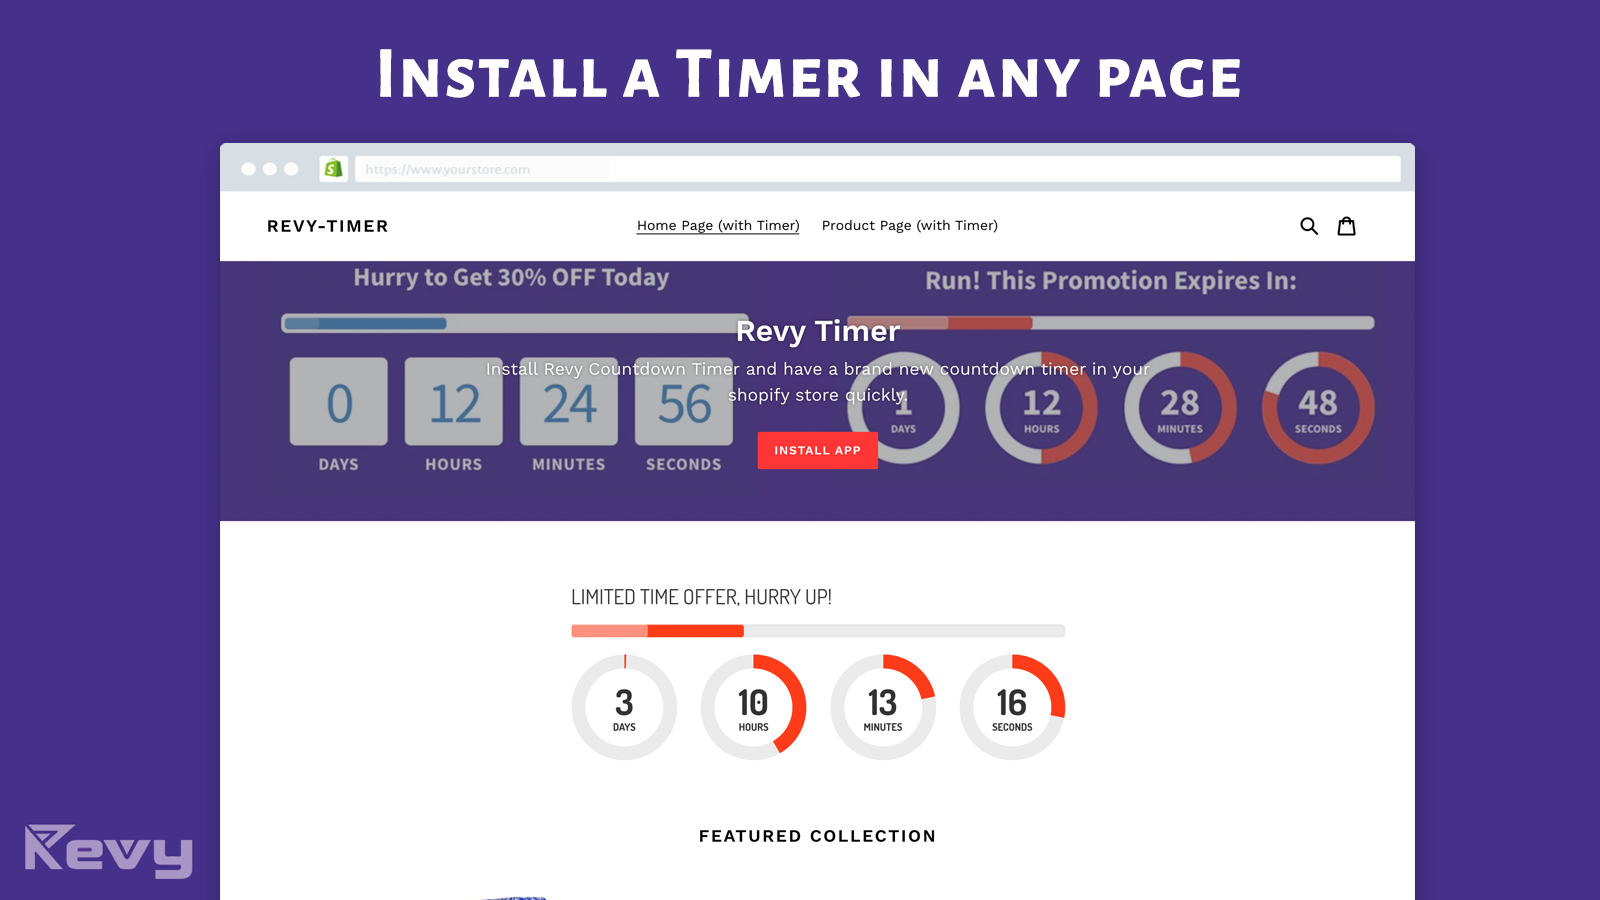 Install countdown timer in any page, homepage, product page, etc